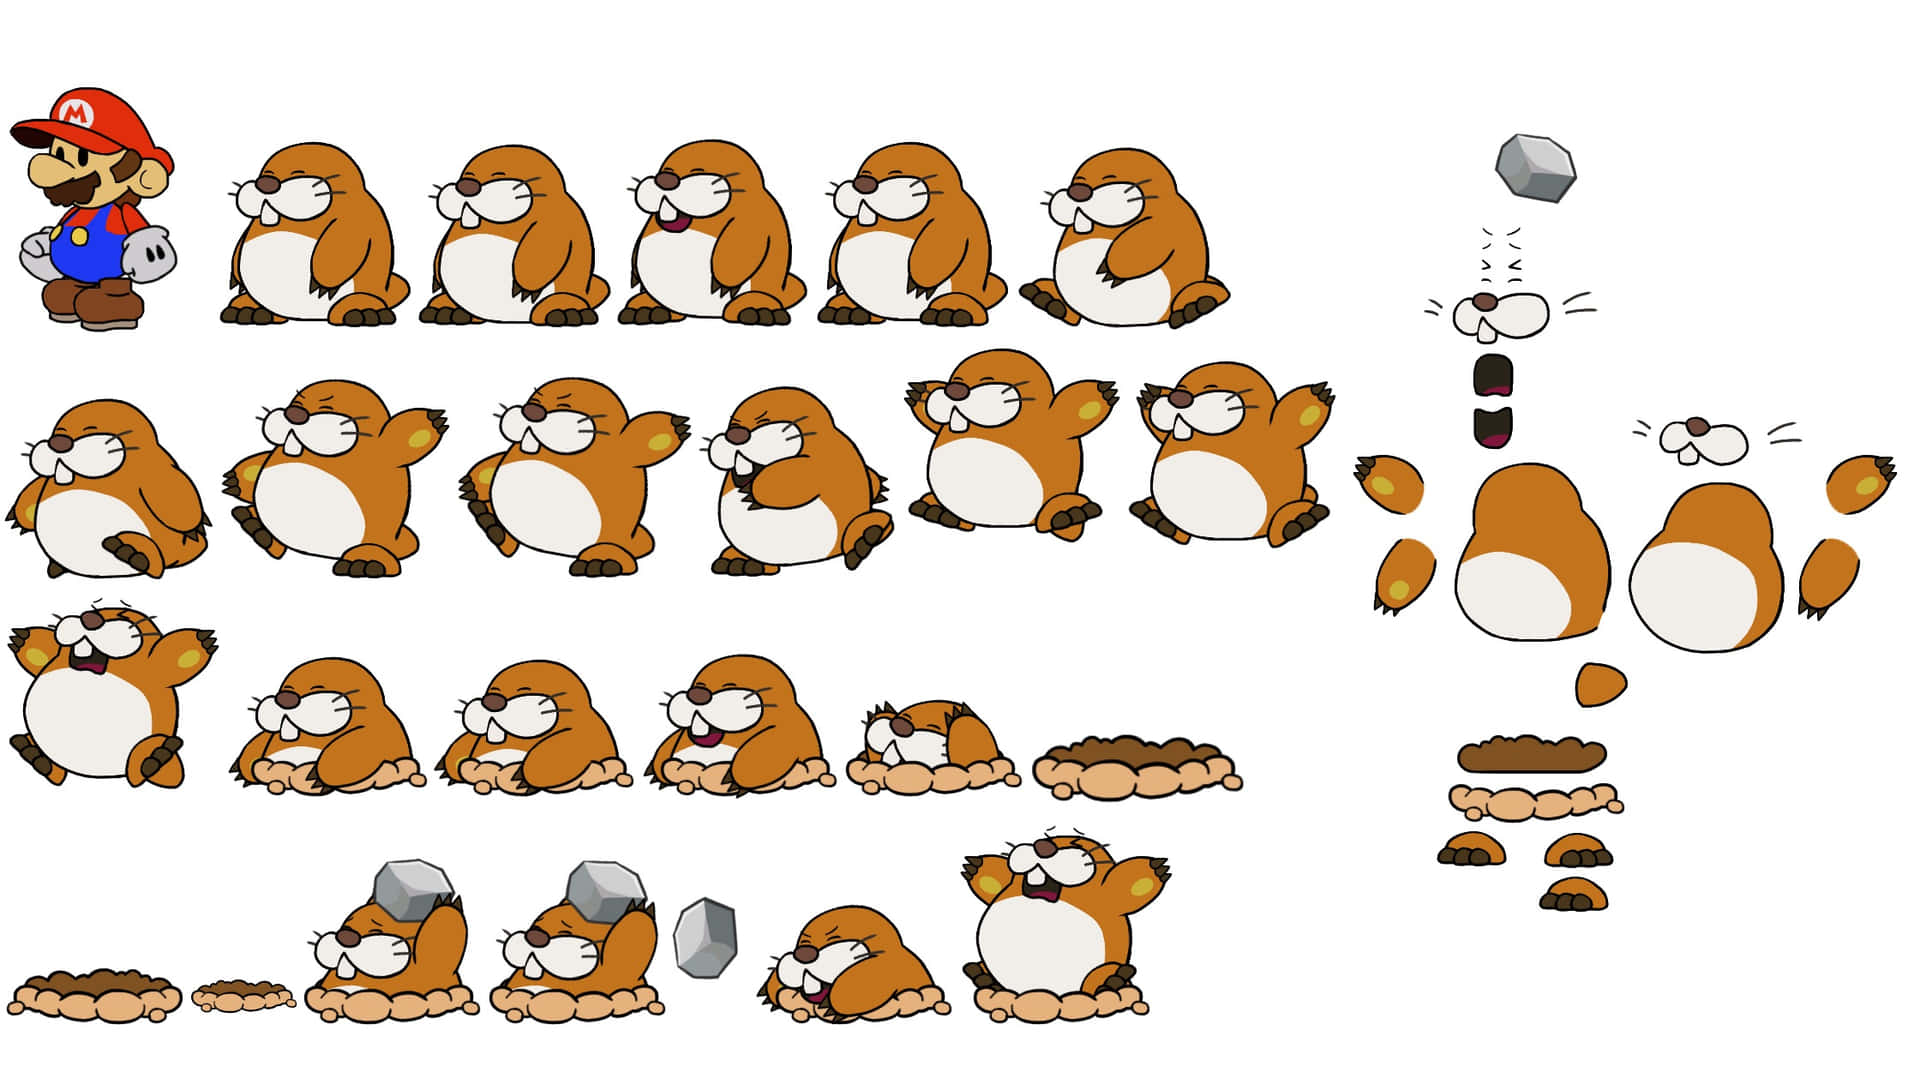 Energized Monty Mole Character In Action Wallpaper